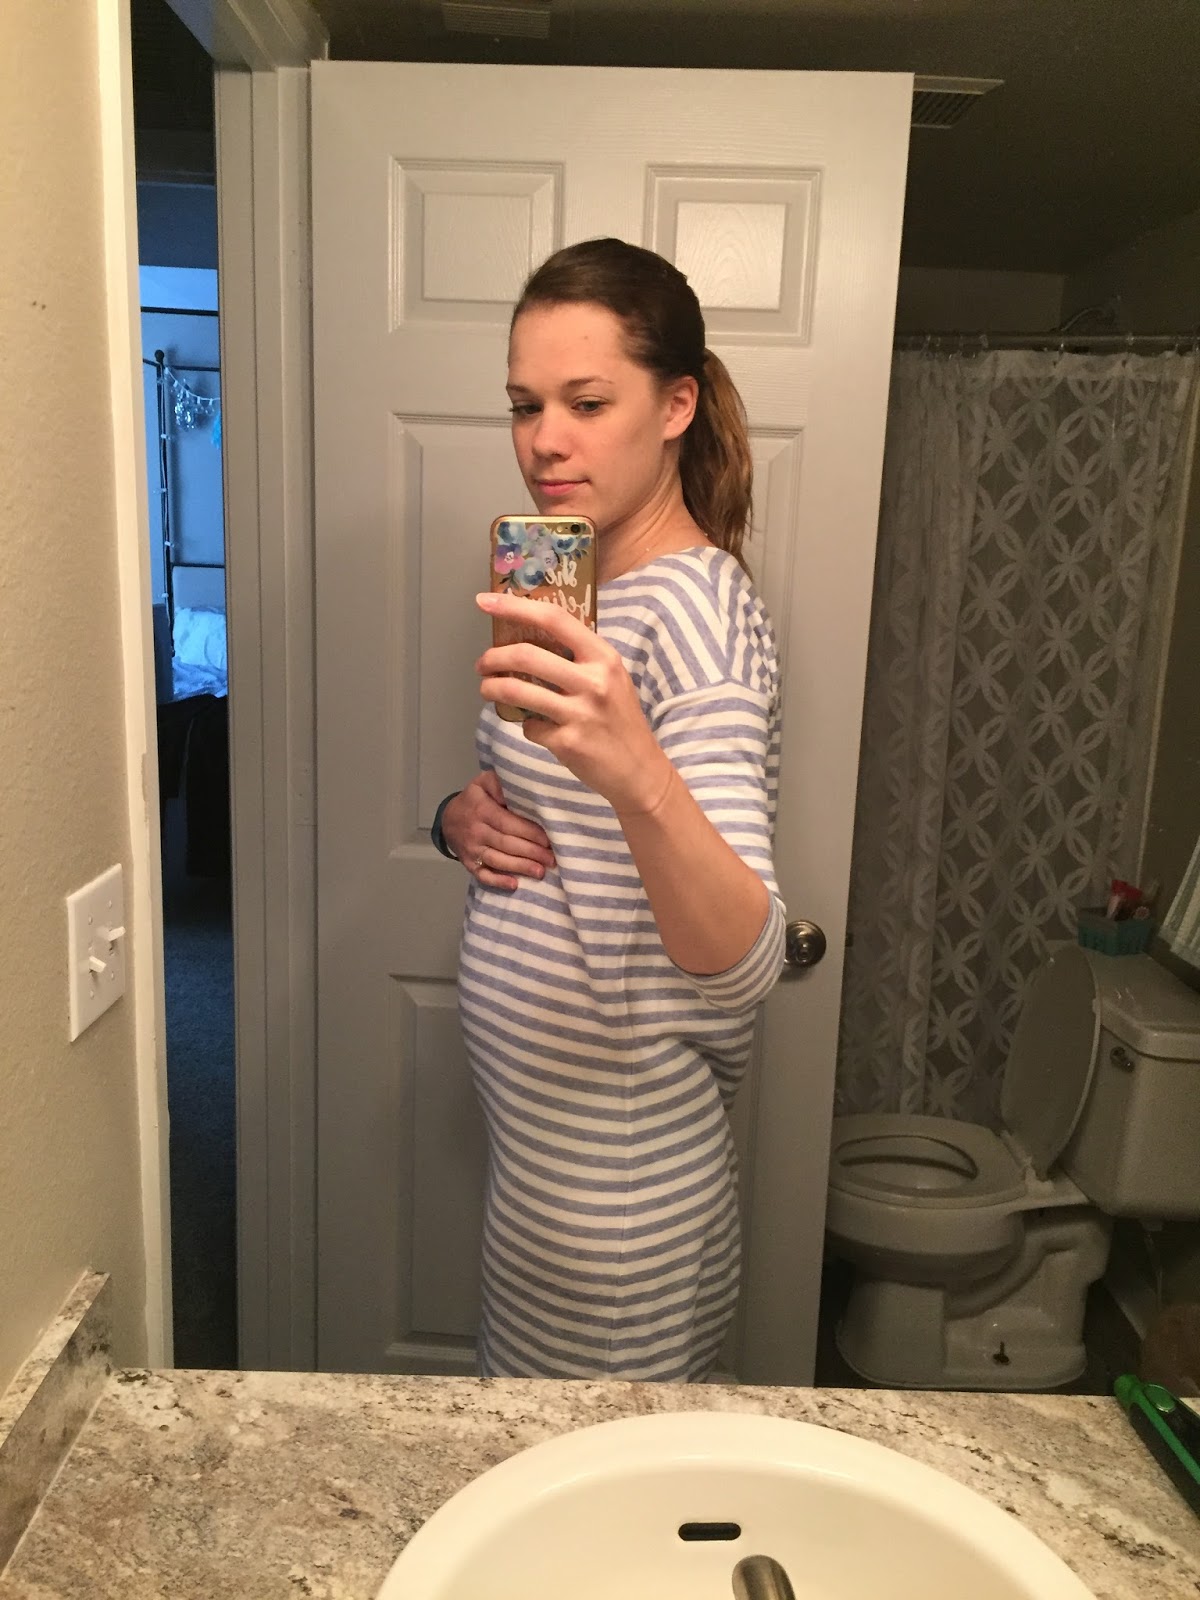 13 Weeks 4 Days Pregnant Baby Development: What’s Happening Inside Your Tummy?